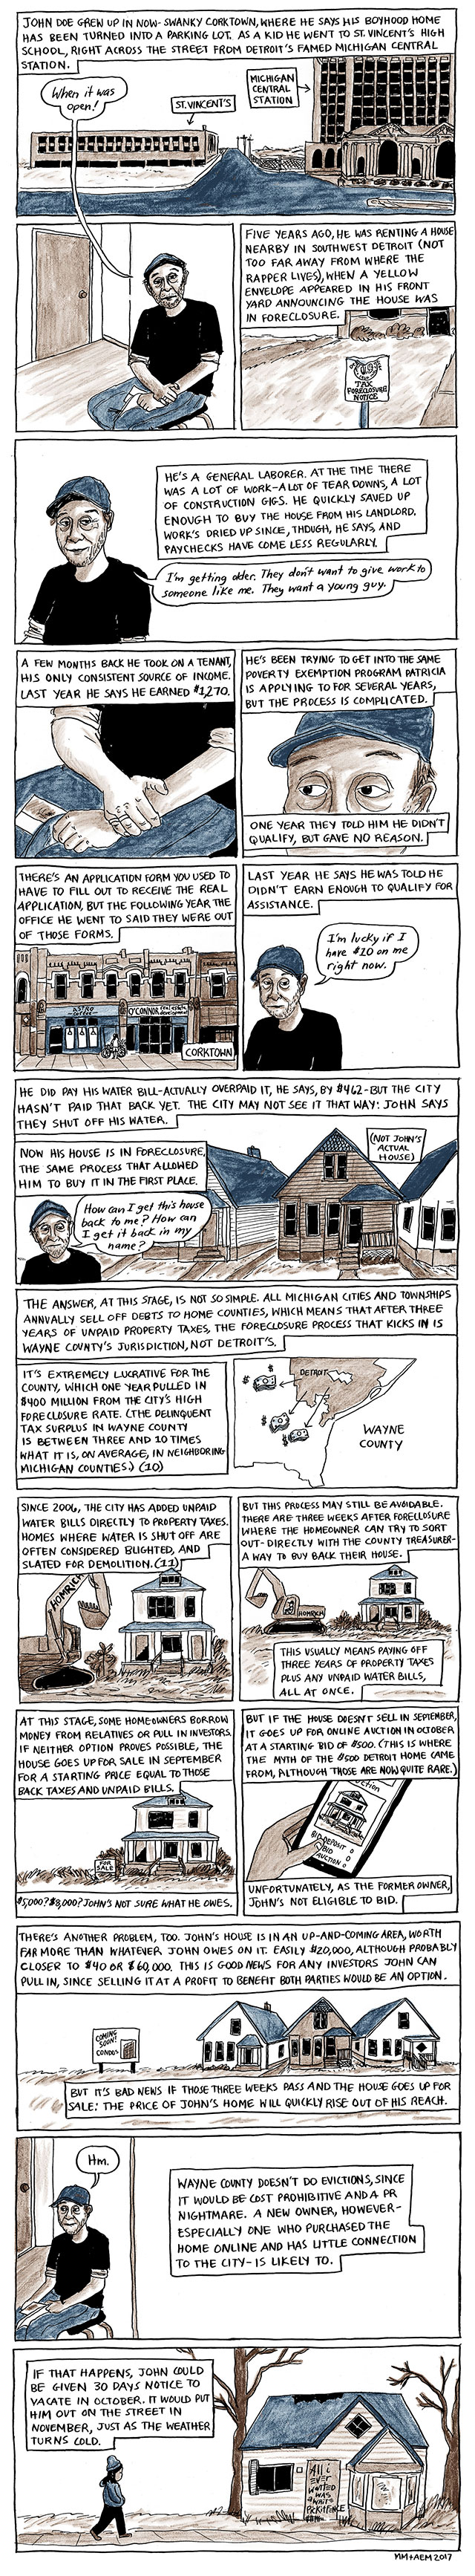 Scenes From the Foreclosure Crisis: Water, Land and Housing in Michigan